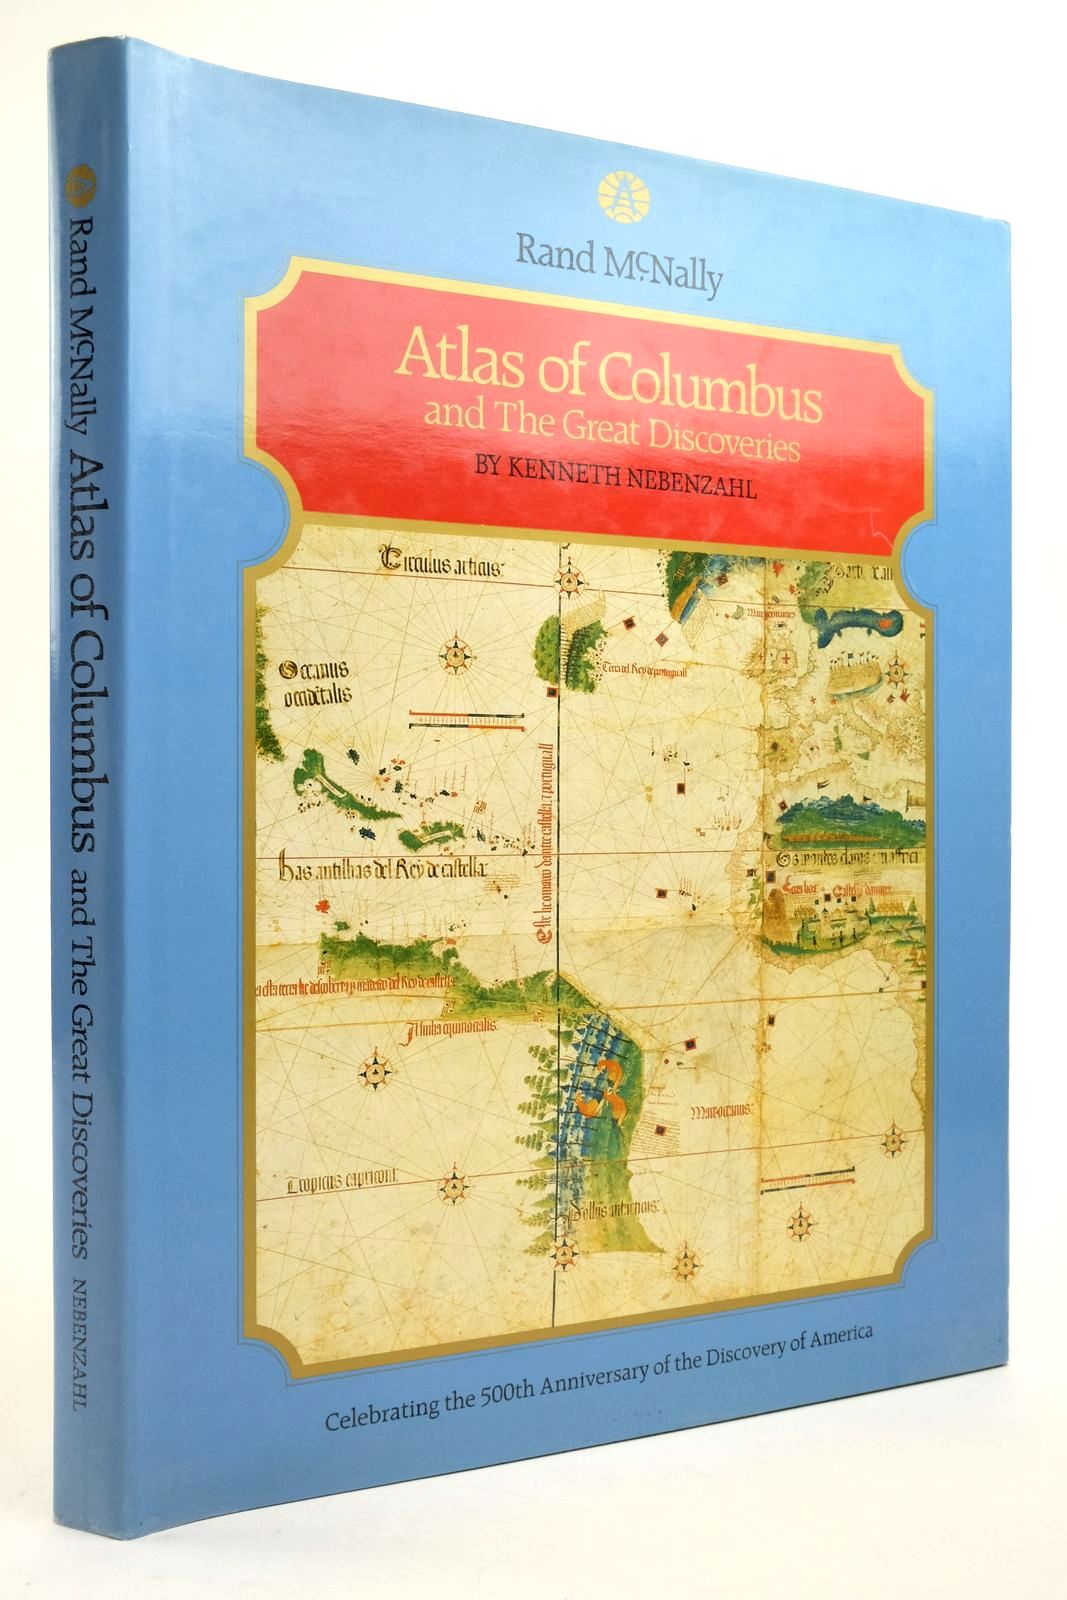 Photo of ATLAS OF COLUMBUS AND THE GREAT DISCOVERIES written by Nebenzahl, Kenneth published by Rand McNally & Company (STOCK CODE: 2138627)  for sale by Stella & Rose's Books